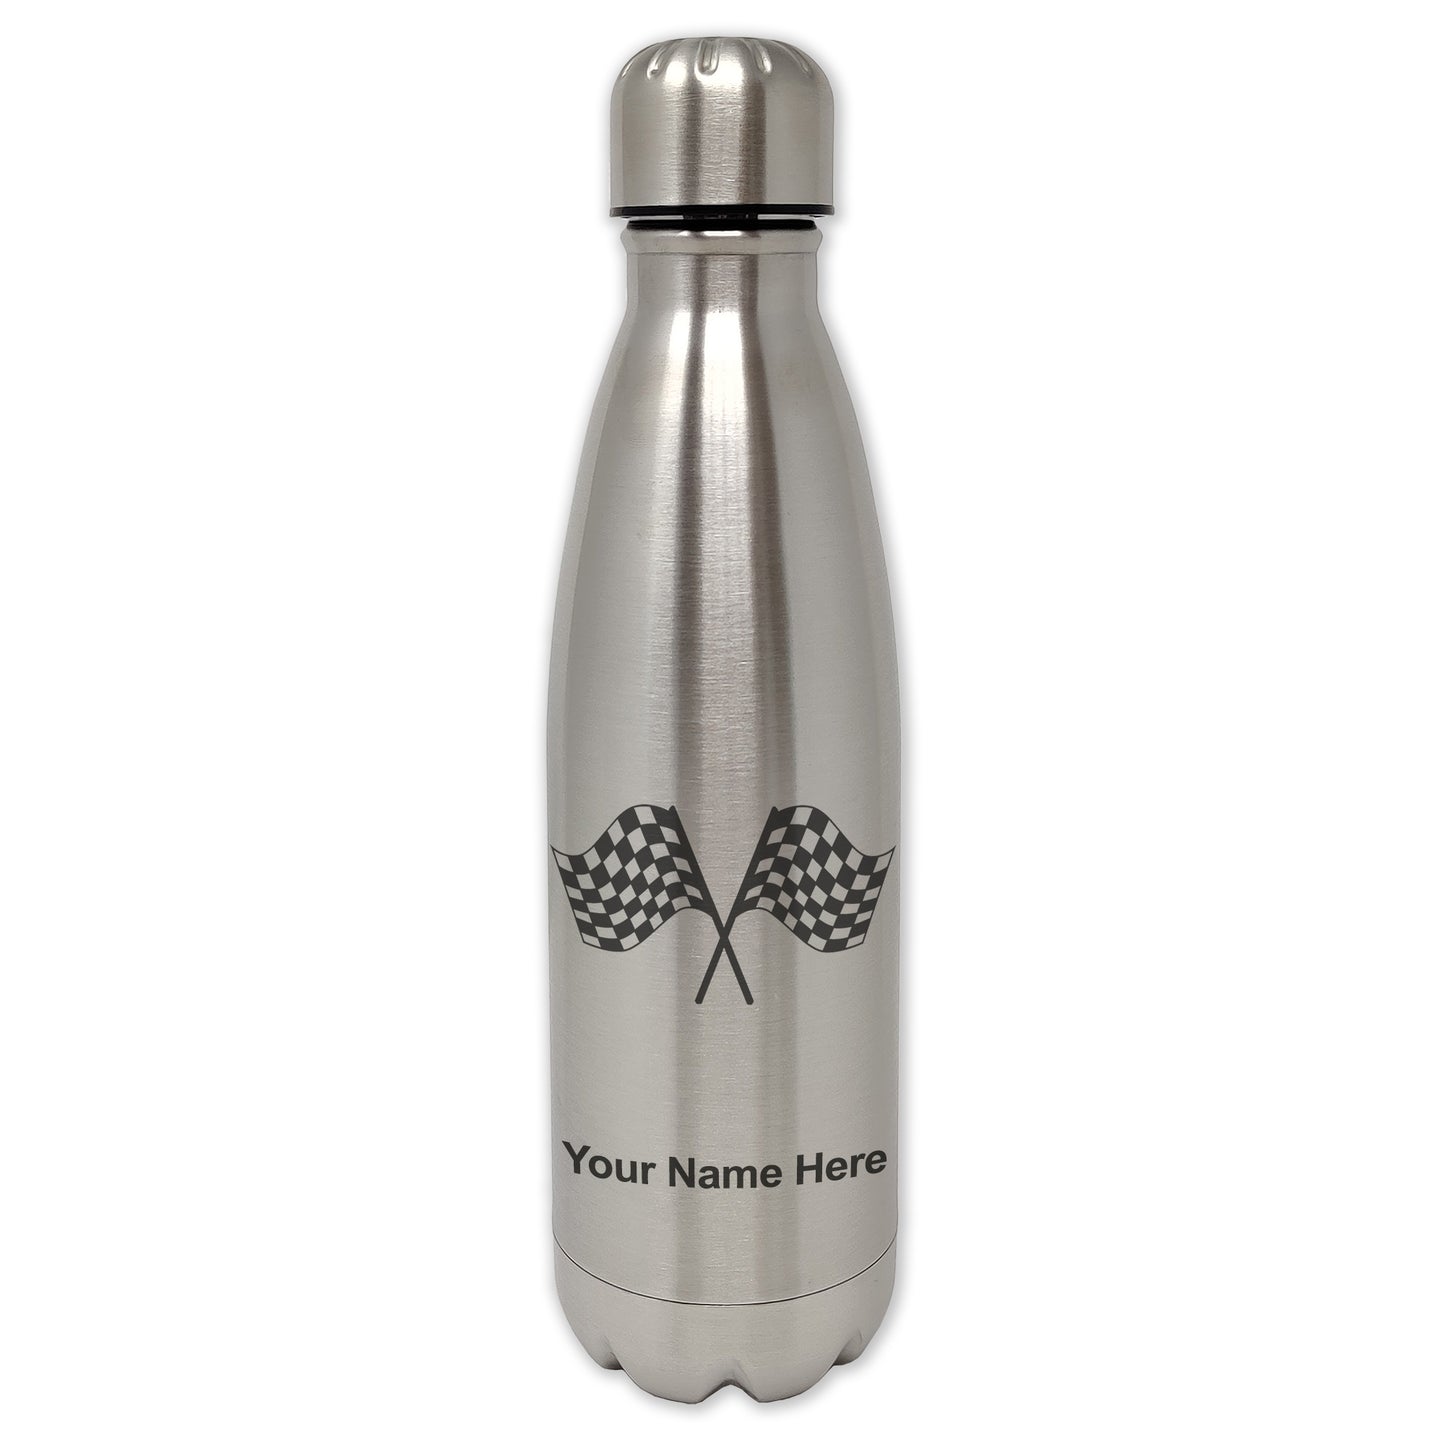 LaserGram Single Wall Water Bottle, Racing Flags, Personalized Engraving Included